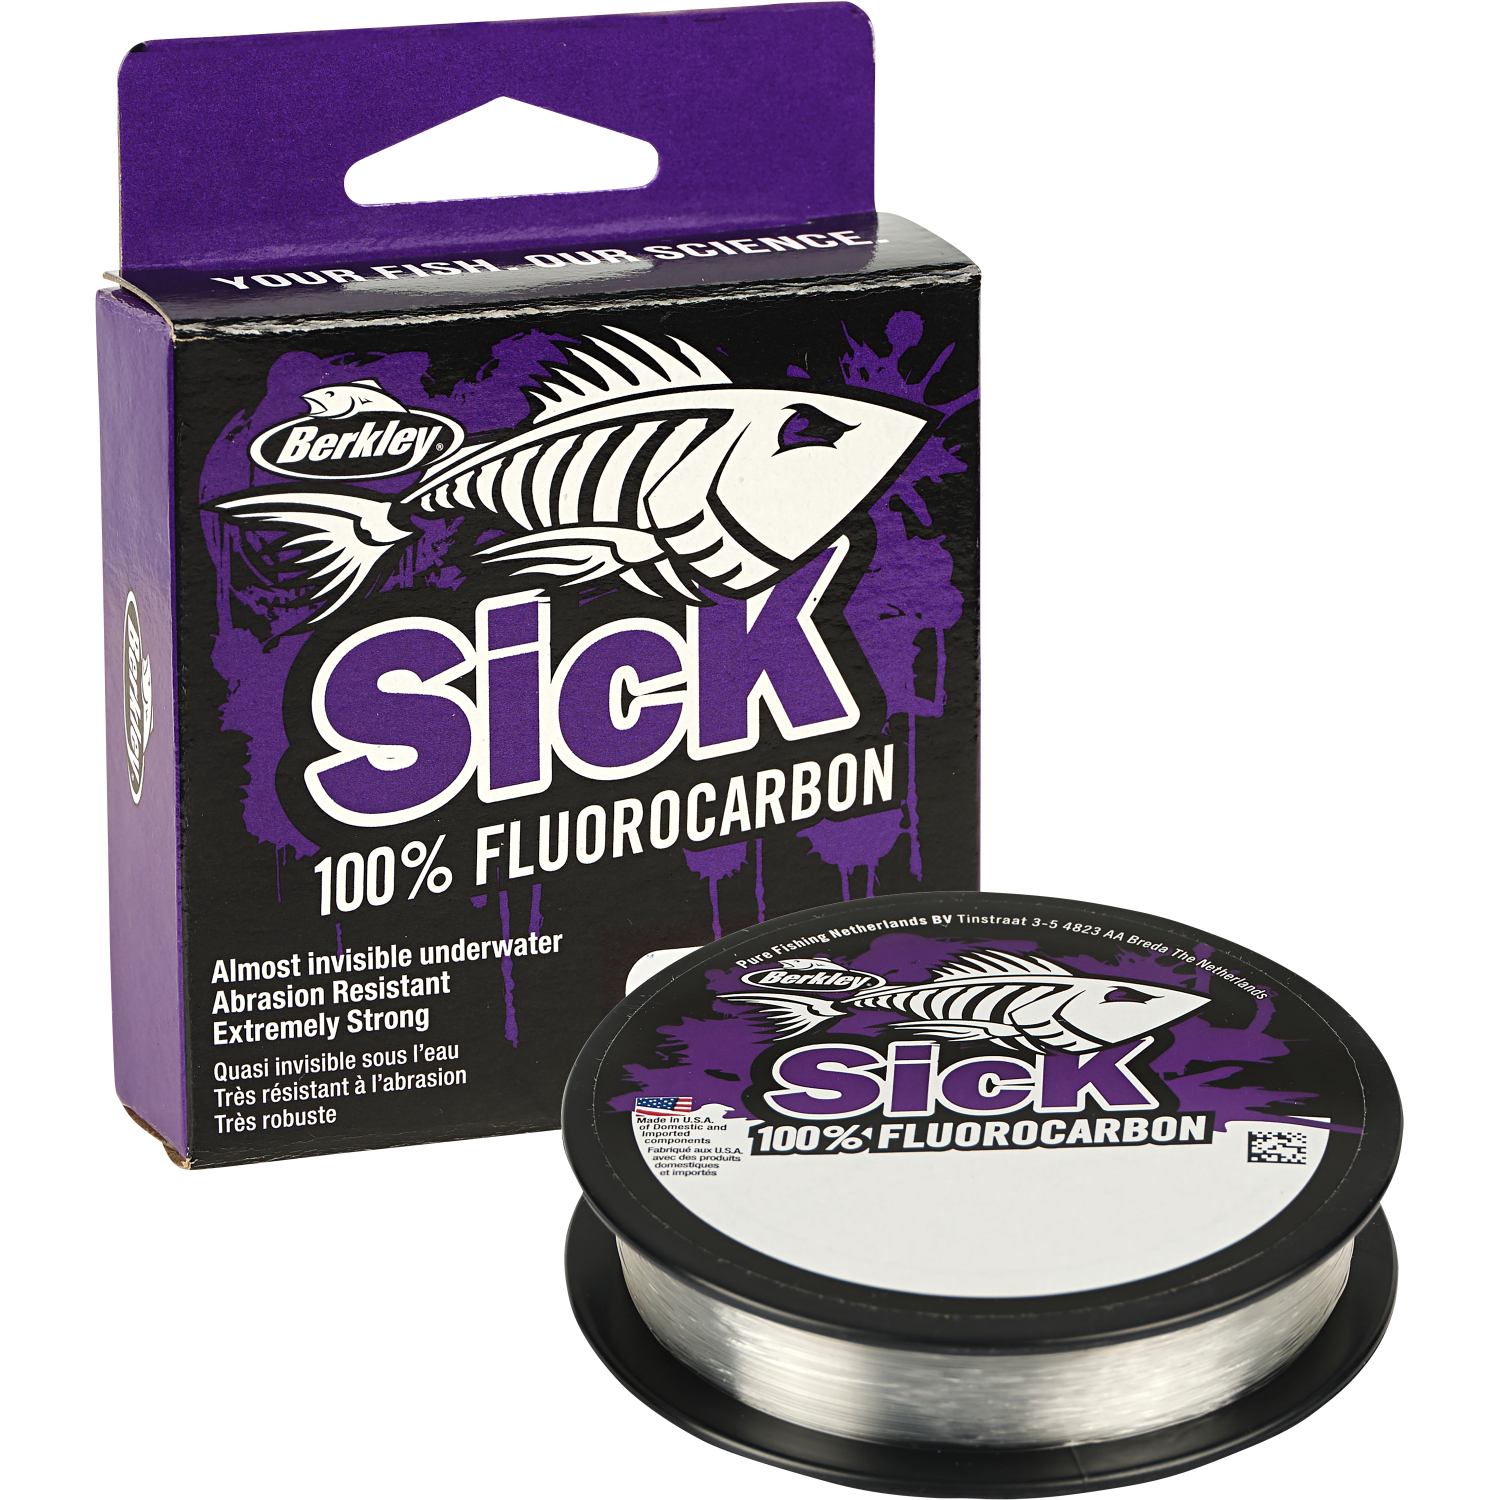 Berkley Fishing Line Sick Fluorocarbon Leader at low prices